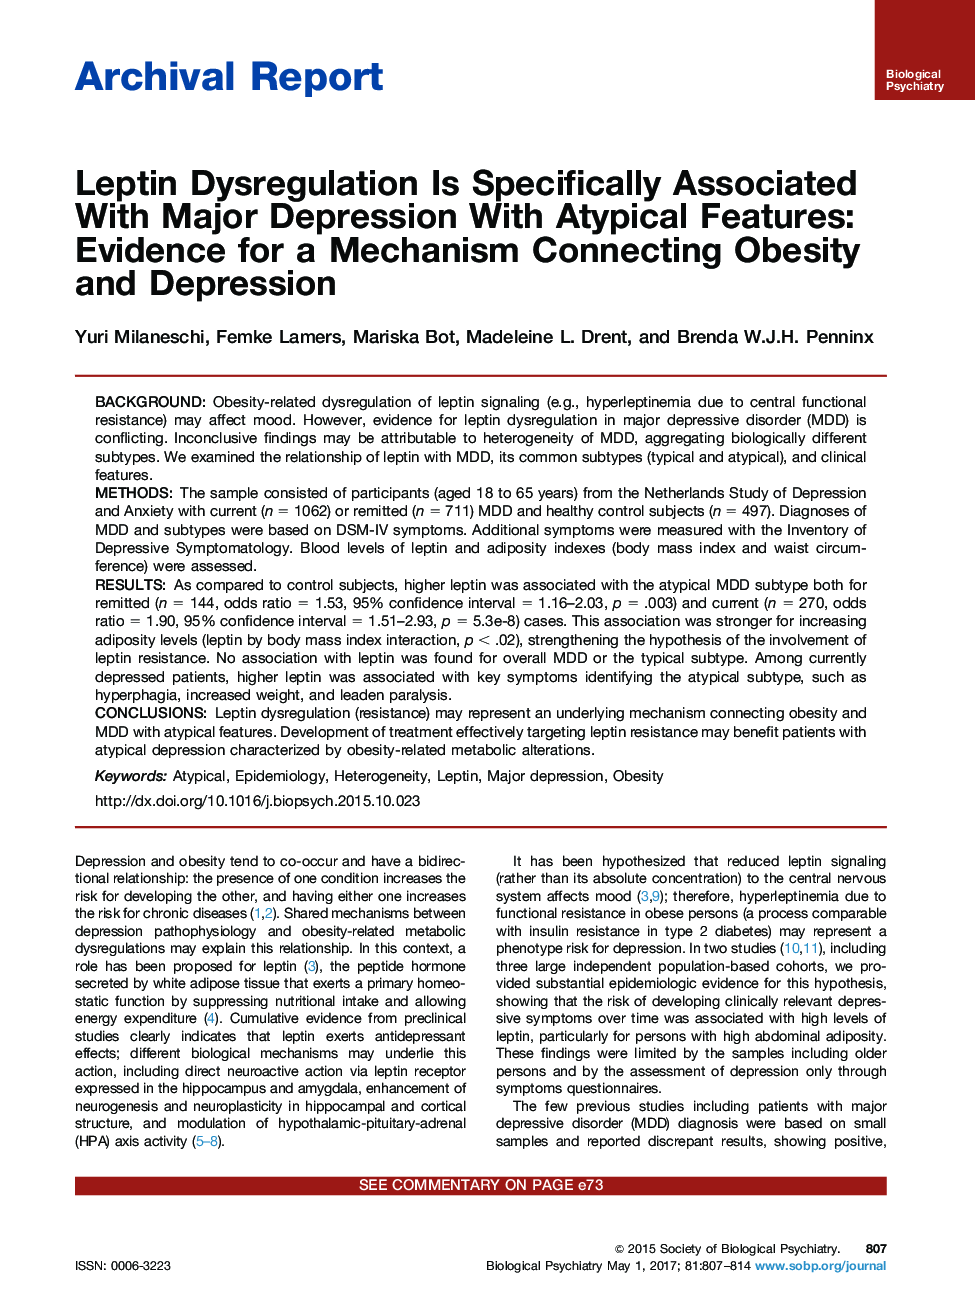 Archival ReportLeptin Dysregulation Is Specifically Associated With Major Depression With Atypical Features: Evidence for a Mechanism Connecting Obesity and Depression